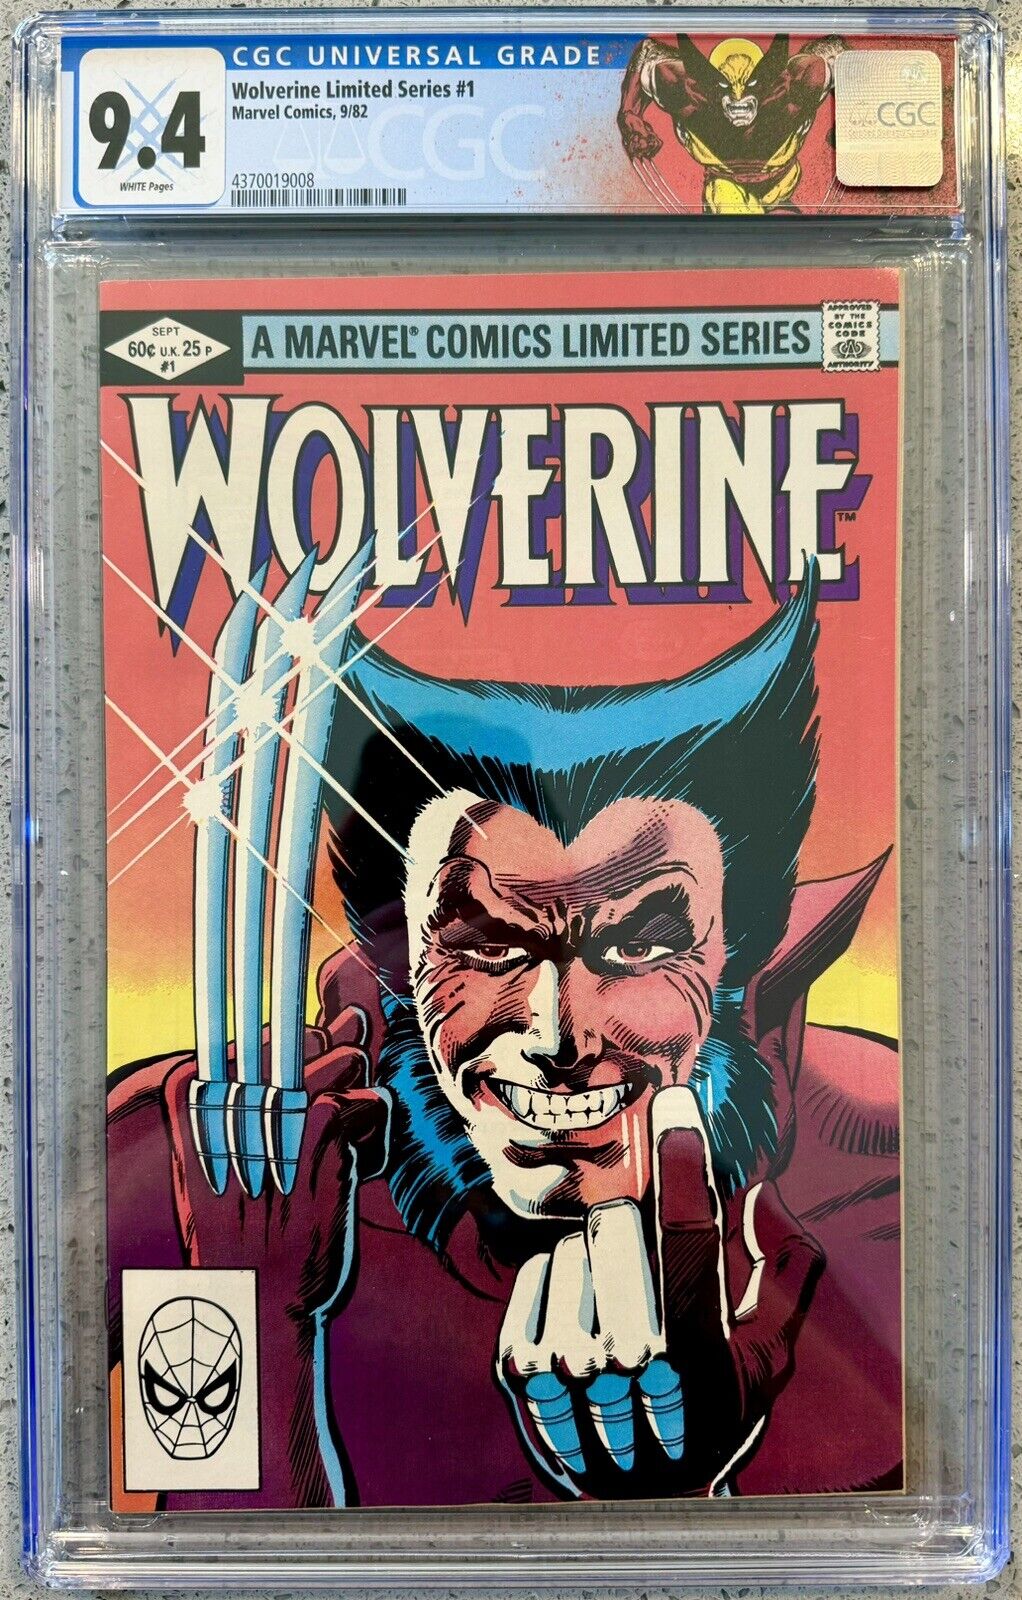 🔥 WOLVERINE #1 1982 CGC 9.4 WHITE Pages + Custom Label 1st Solo/Limited Series